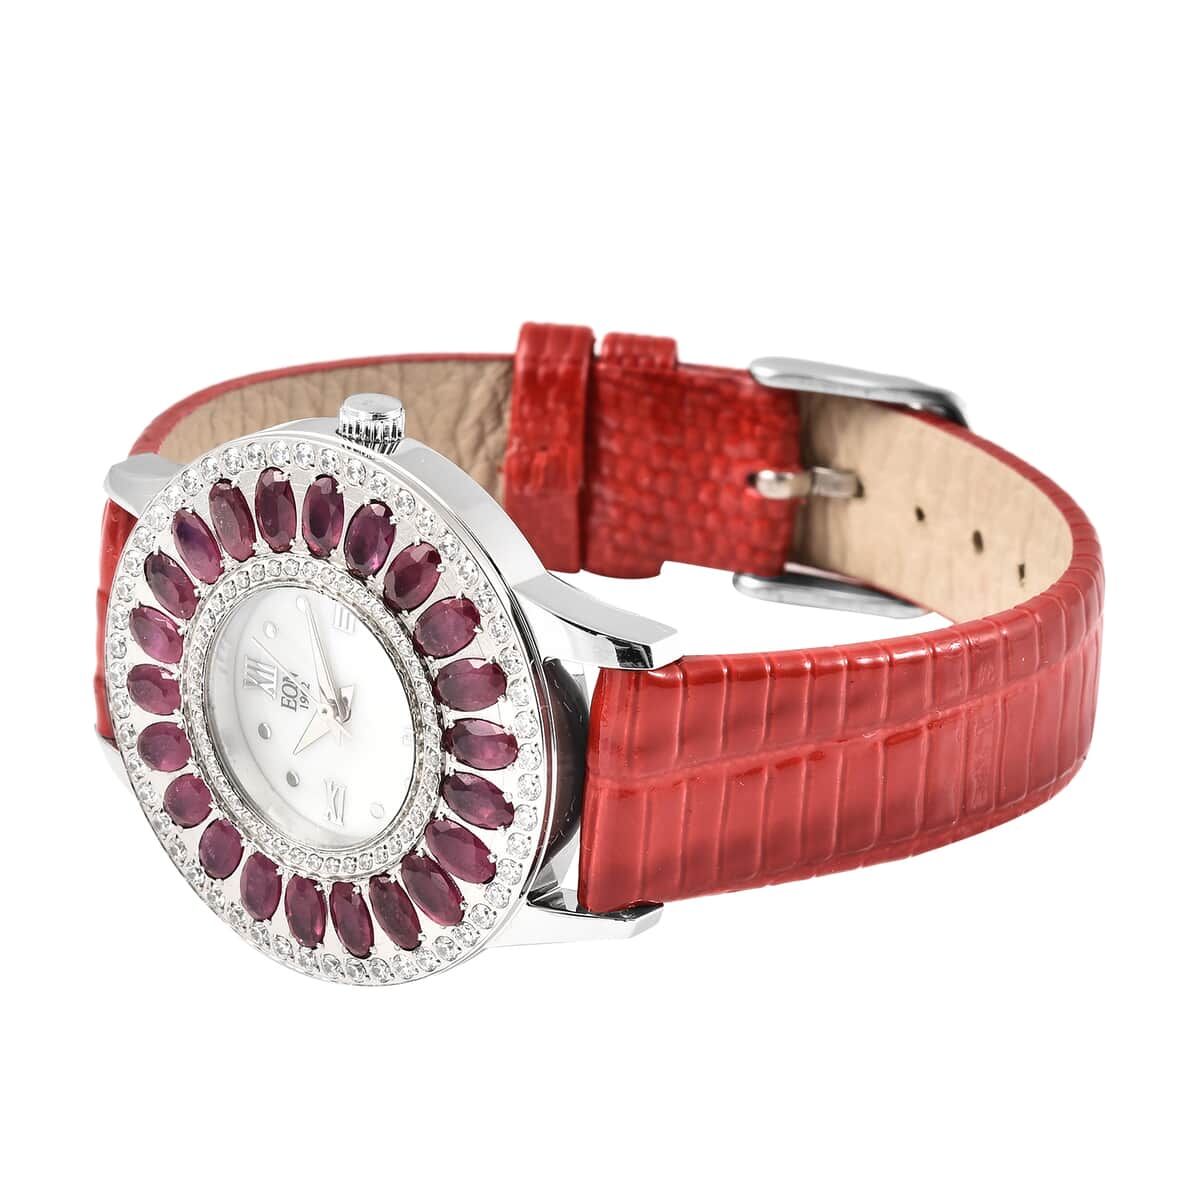 Eon 1962 Niassa Ruby (FF) Swiss Movement Stainless Steel Triple Halo MOP Dial Watch with Red Leather Band 7.00 ctw, Designer Leather Watch, Analog Luxury Wristwatch image number 4